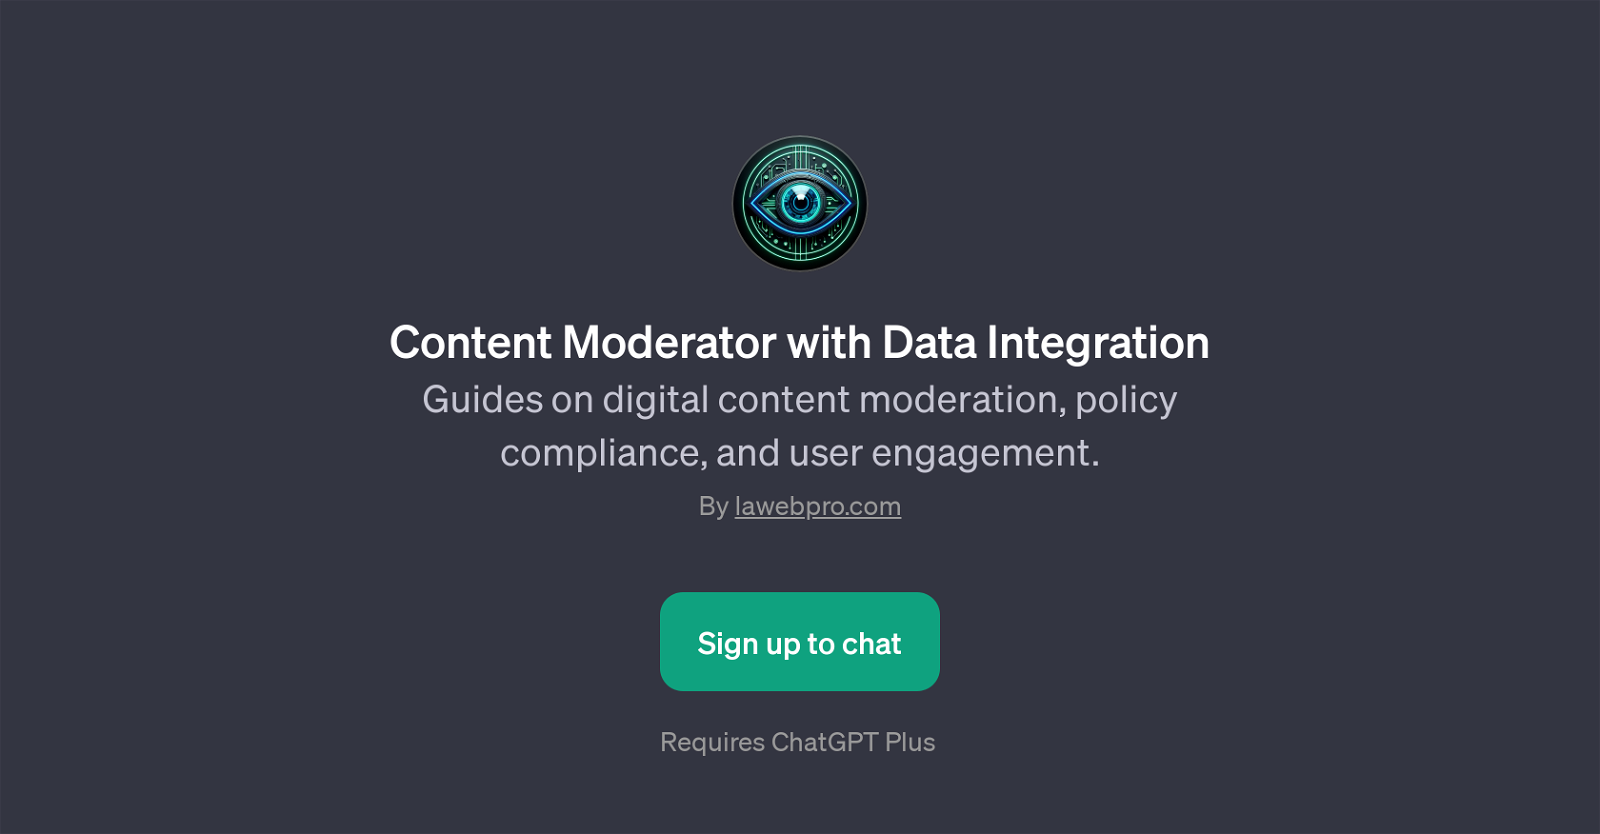 Content Moderator with Data Integration website